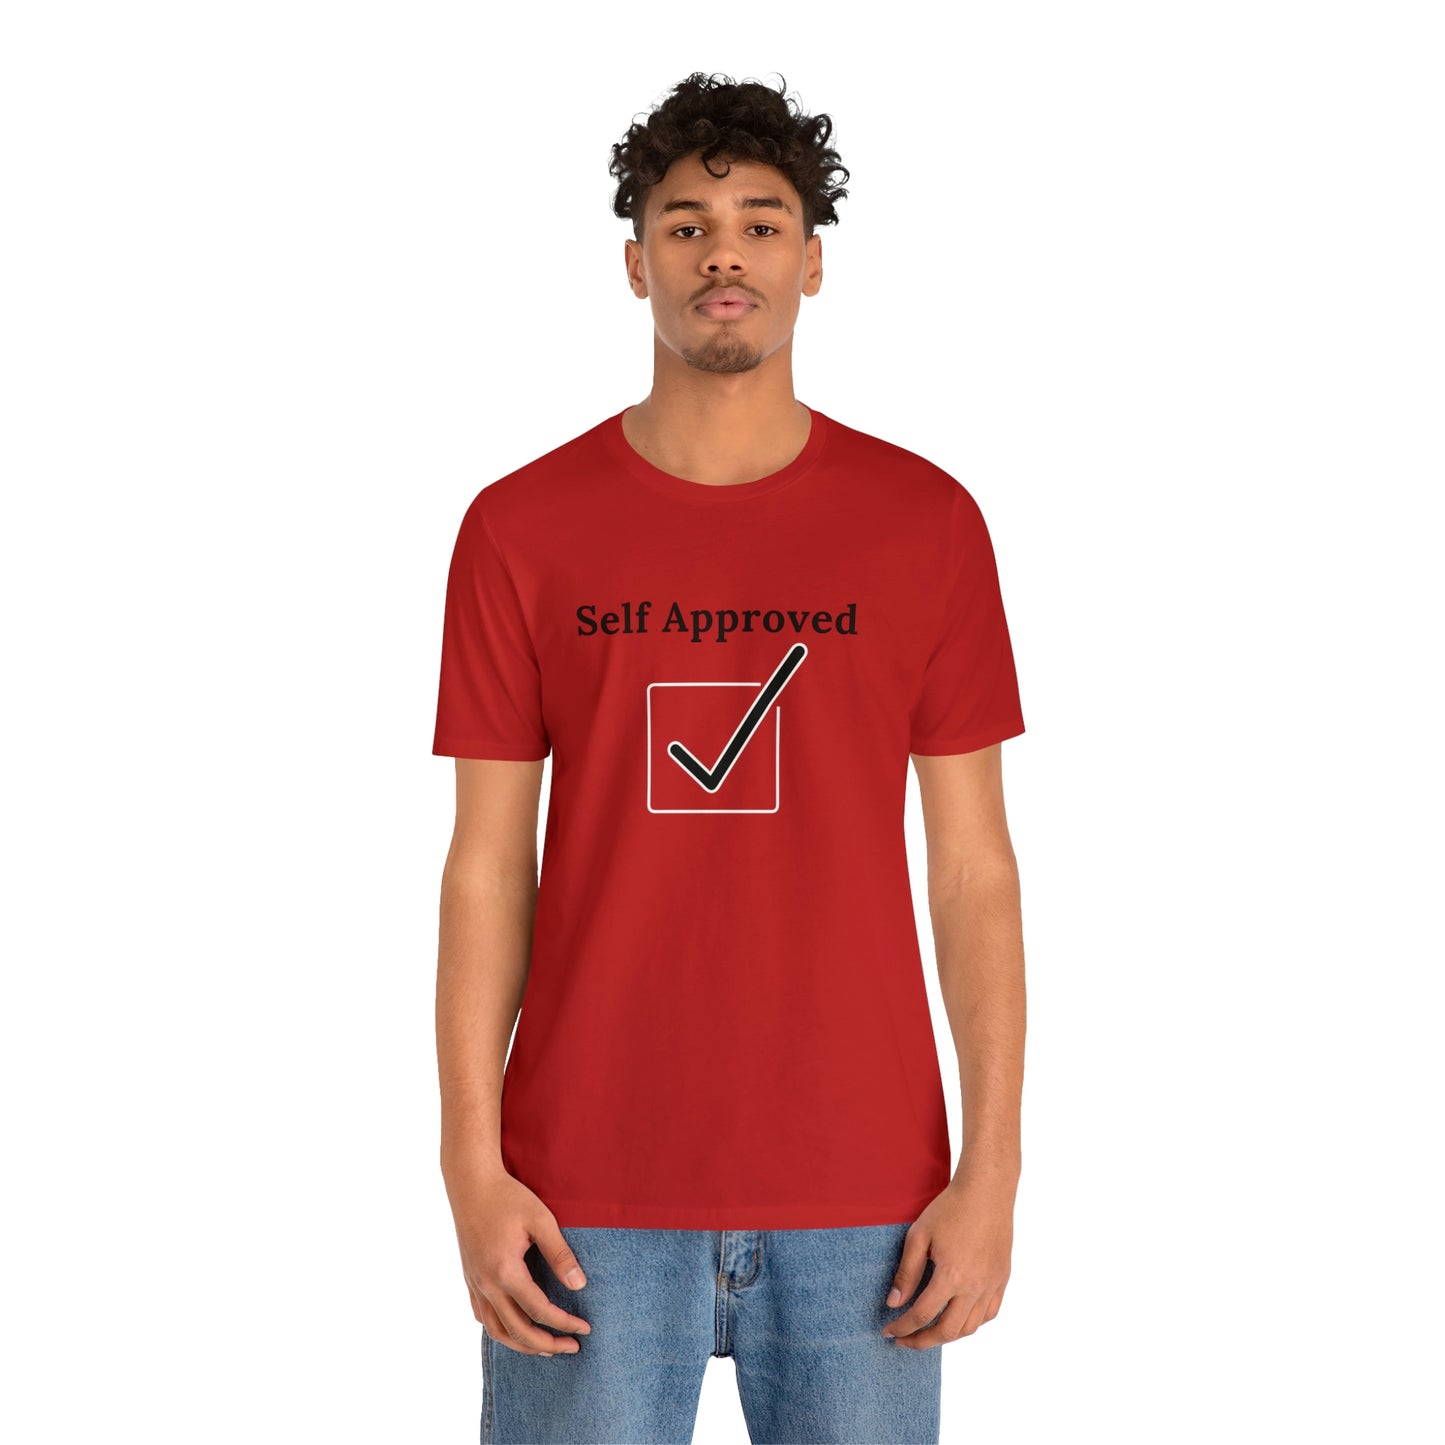 Self Approved Two Showtie Tee